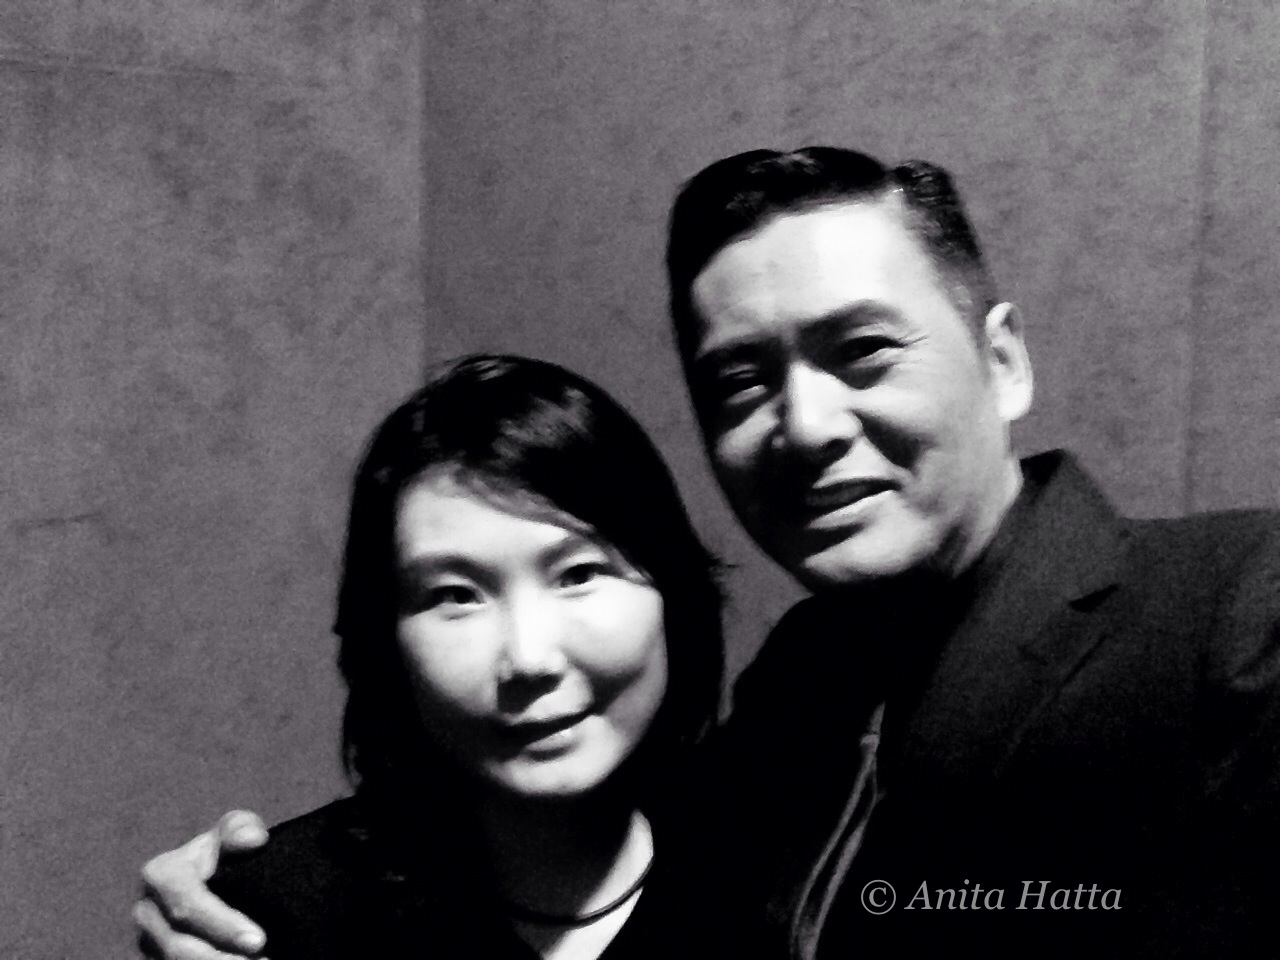 Anita Hatta Chow Yun Fatt Yun-Fat Chow The Monkey King Pirates of the Caribbean: At World's End Crouching Tiger, Hidden Dragon Anna and the King A Better Tomorrow